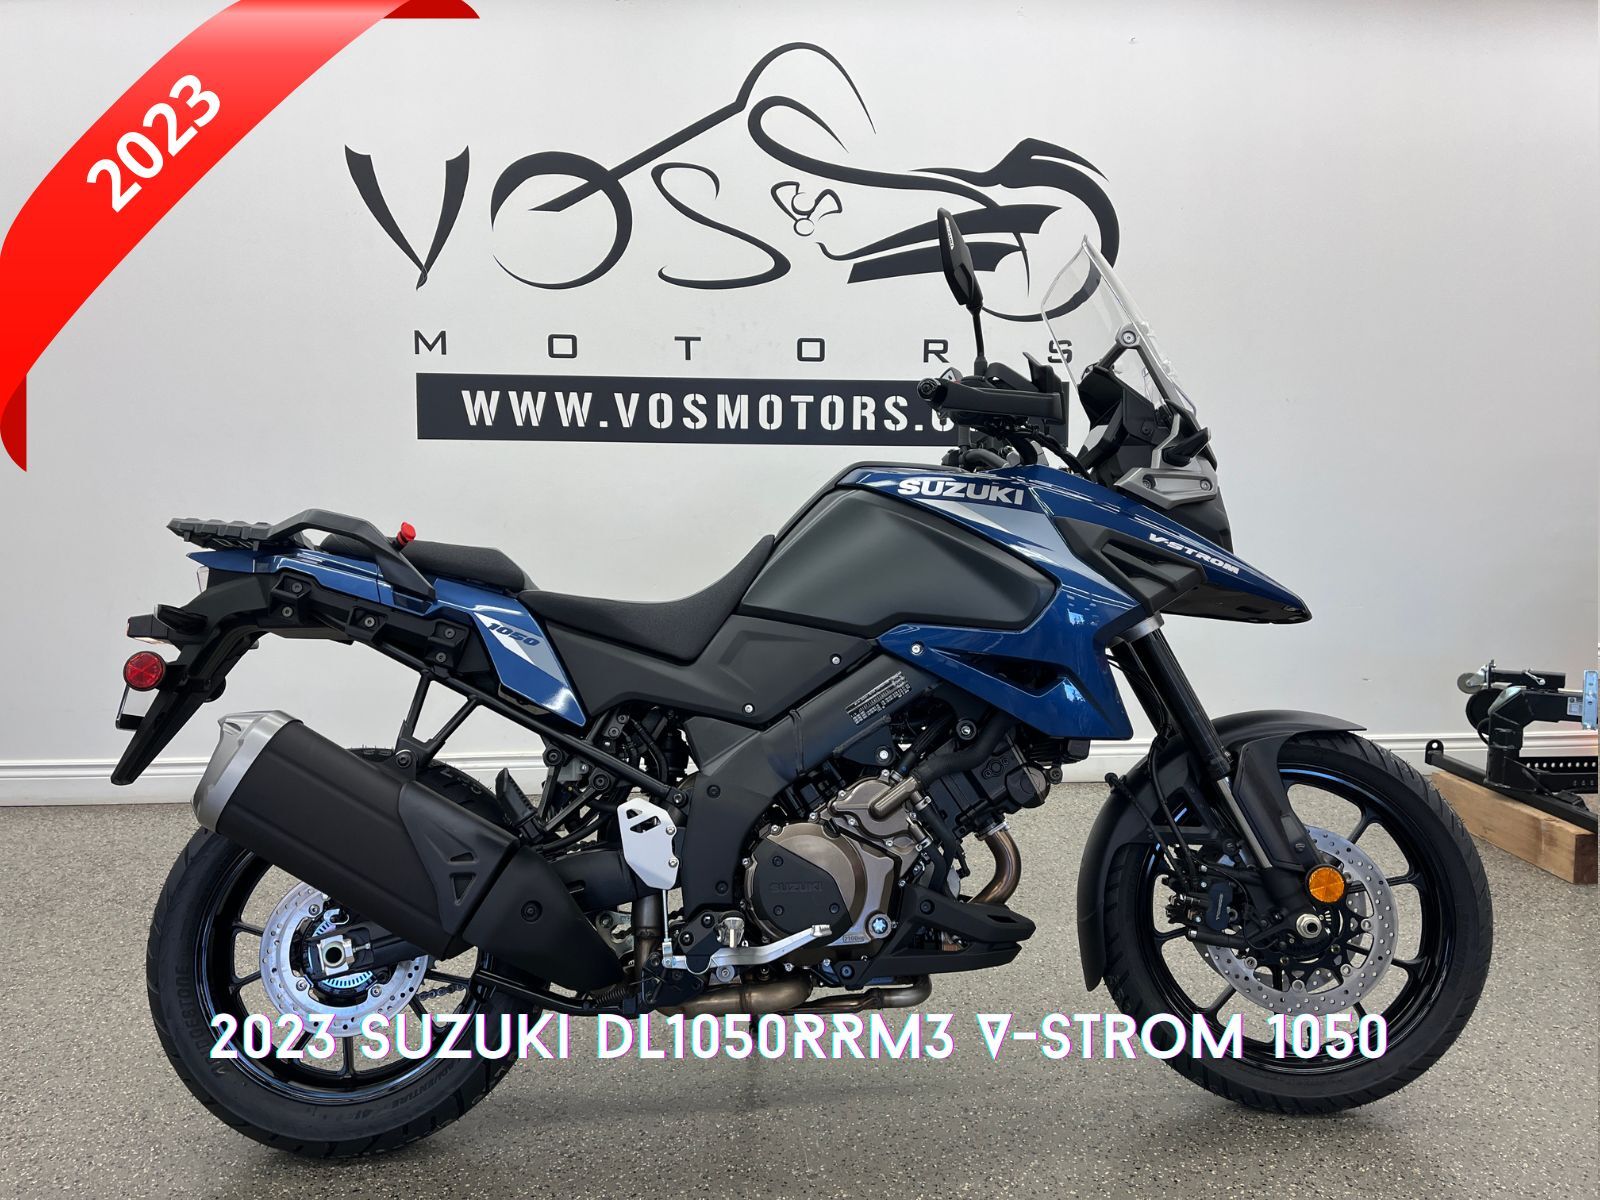 2023 Suzuki DL1050RRM3 V-Strom 1050 - V5785 - -No Payments for 1 Year**